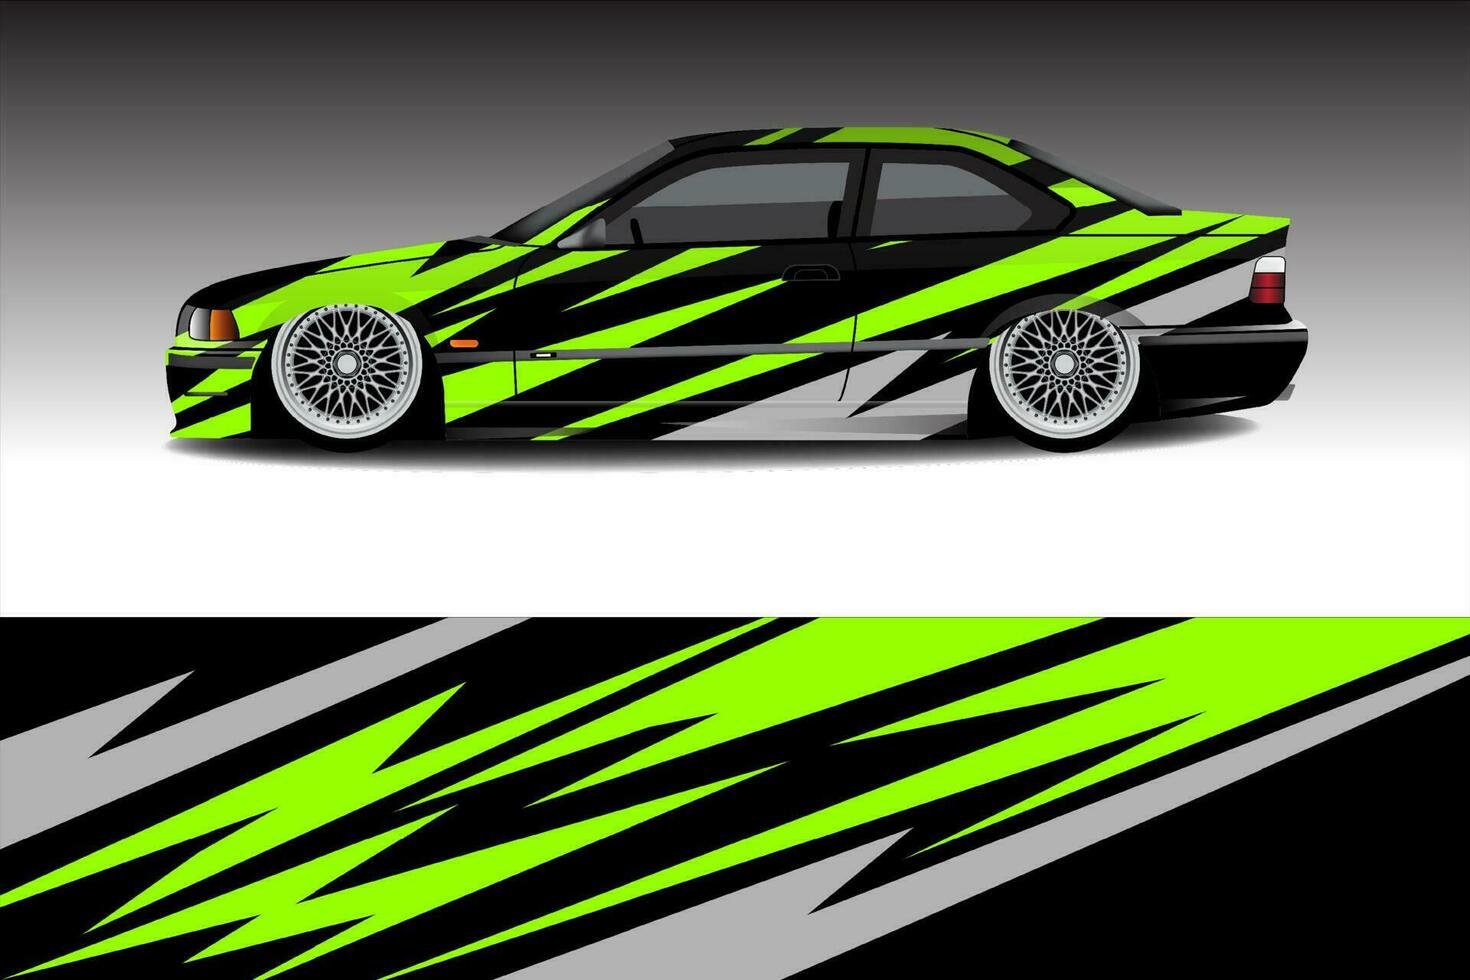 Car wrapping sticker design for racing cars vector